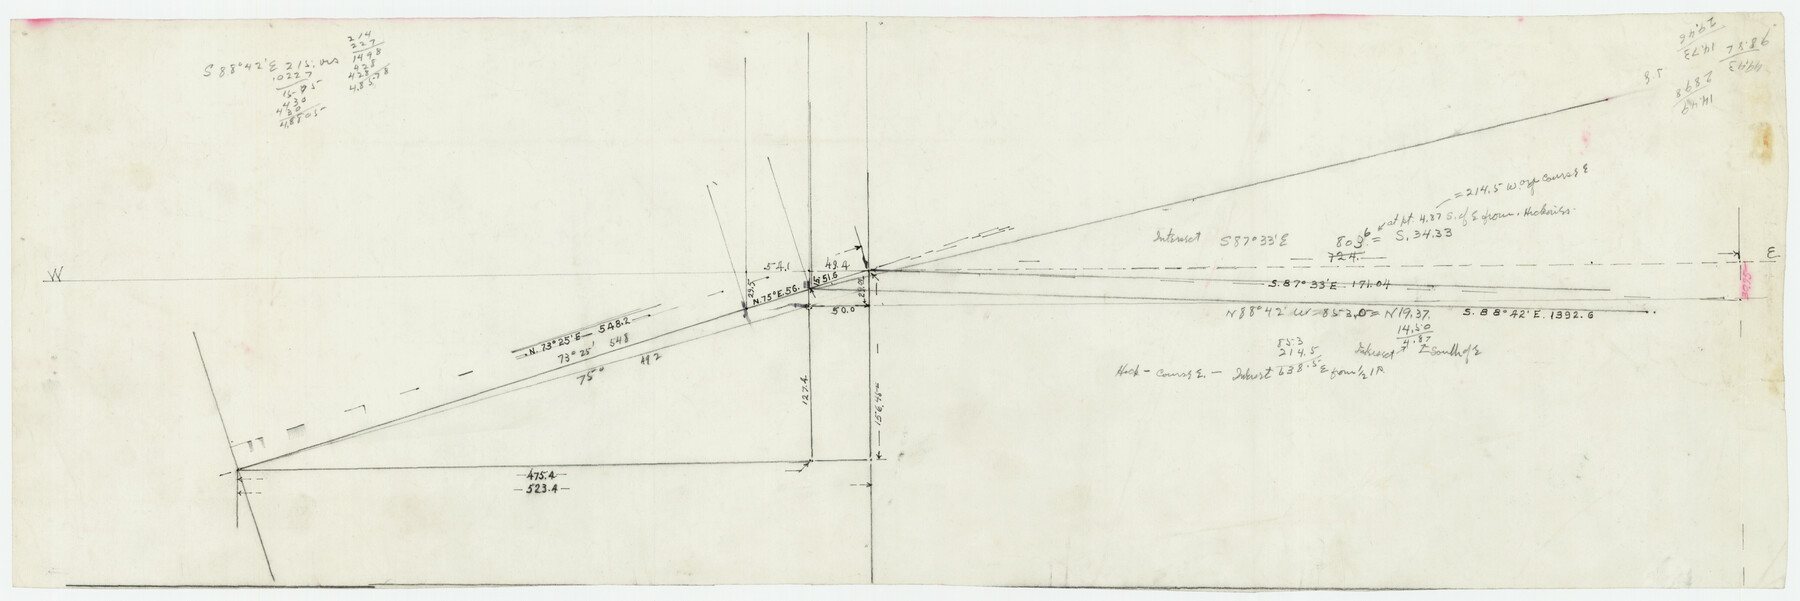 91283, [Worksheets related to the Wilson Strickland survey and vicinity], Twichell Survey Records